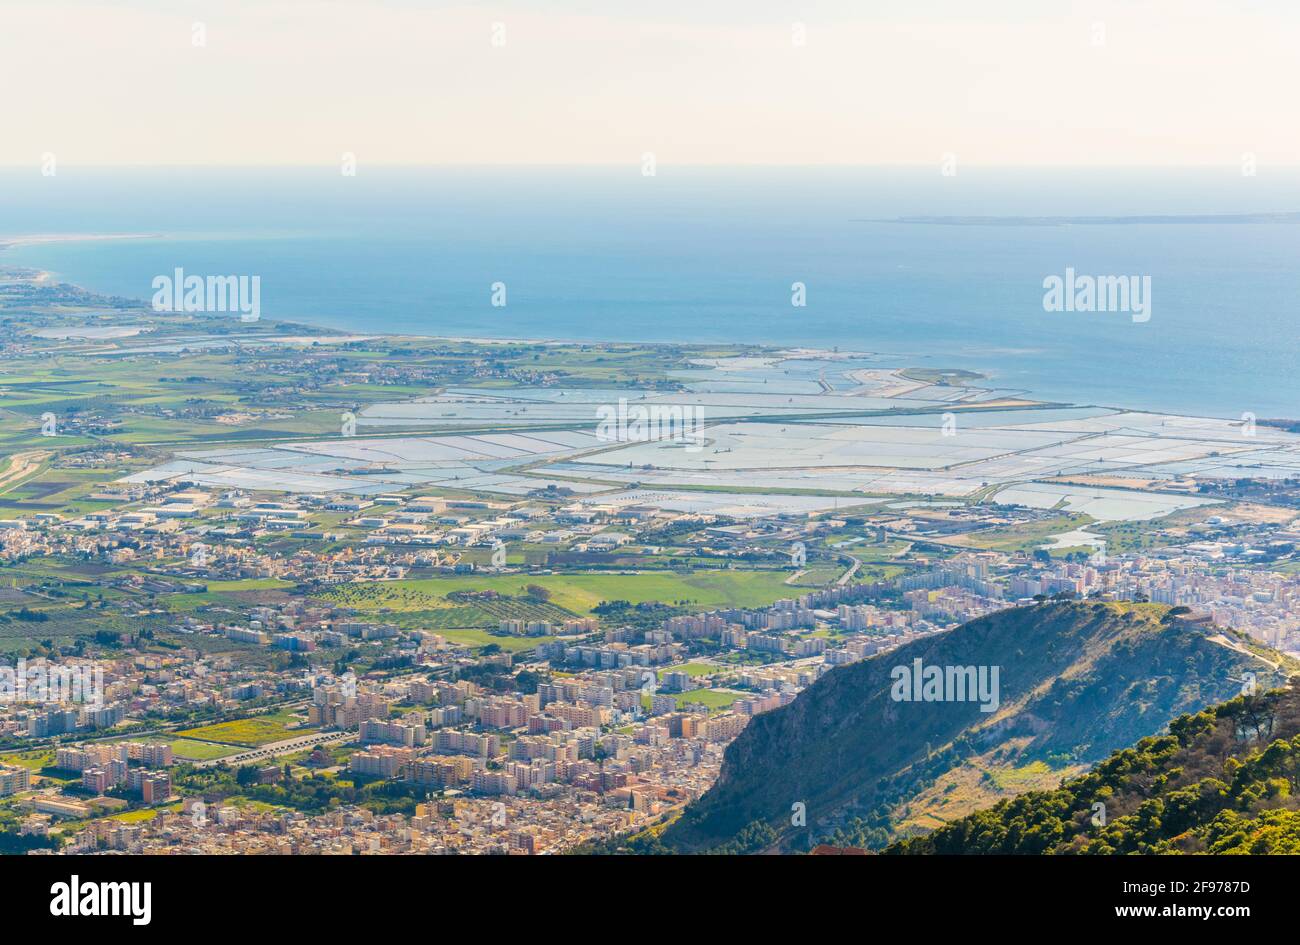 Aerial view of salinas of Trapani on Sicily, Italy Stock Photo